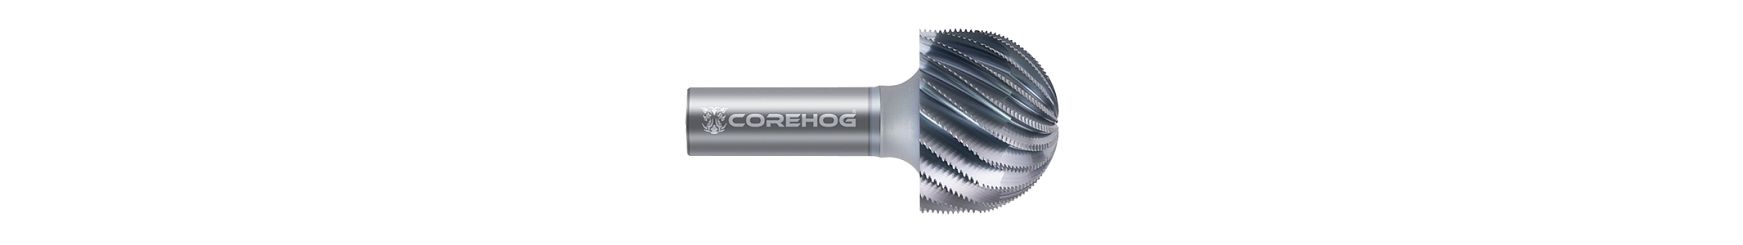 Roughing Core Tools-CoreHoggers-Ball-Reduced Shank